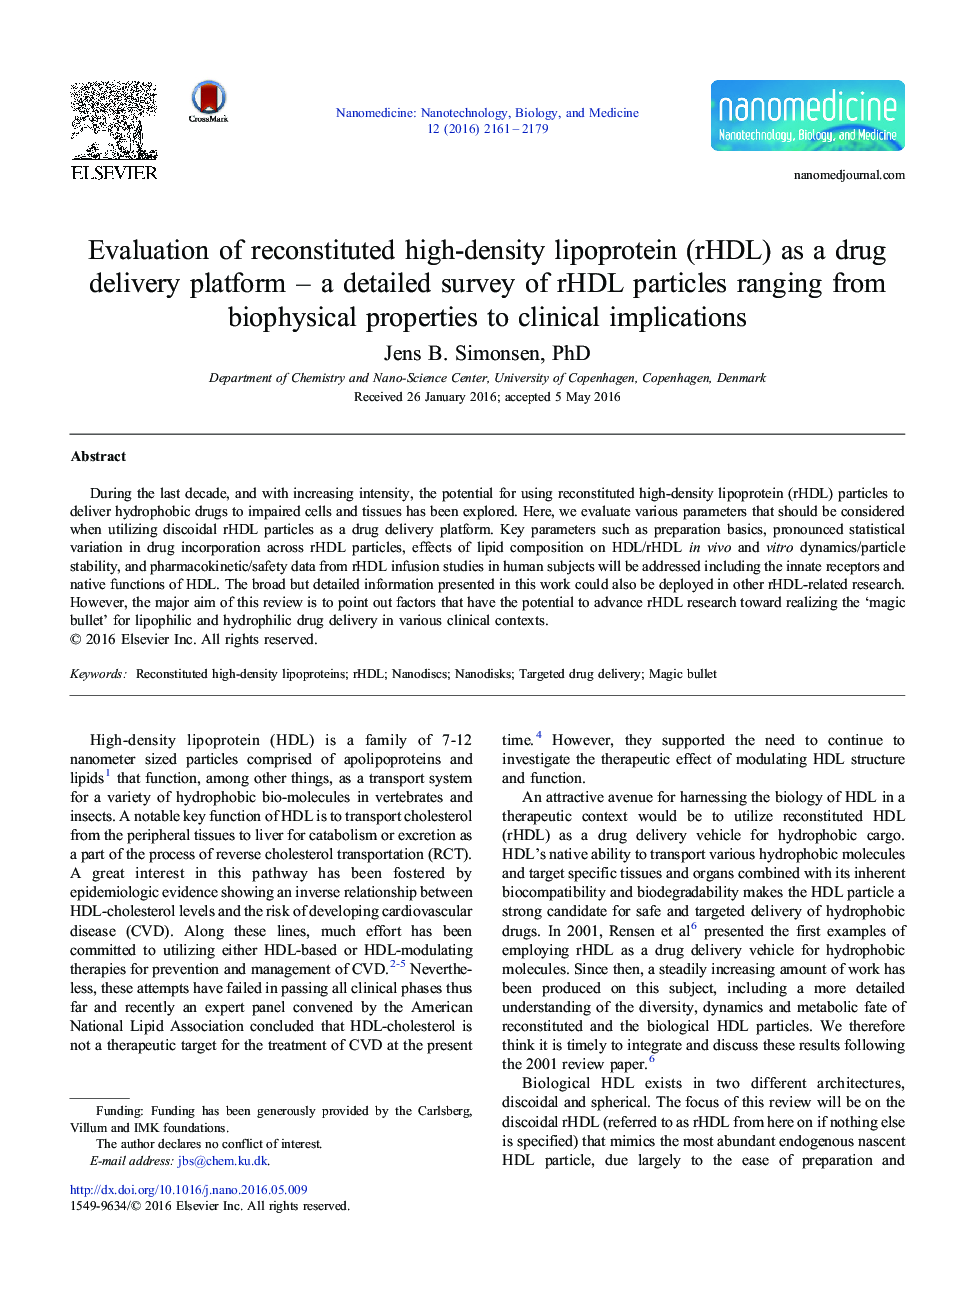 Evaluation of reconstituted high-density lipoprotein (rHDL) as a drug delivery platform - a detailed survey of rHDL particles ranging from biophysical properties to clinical implications